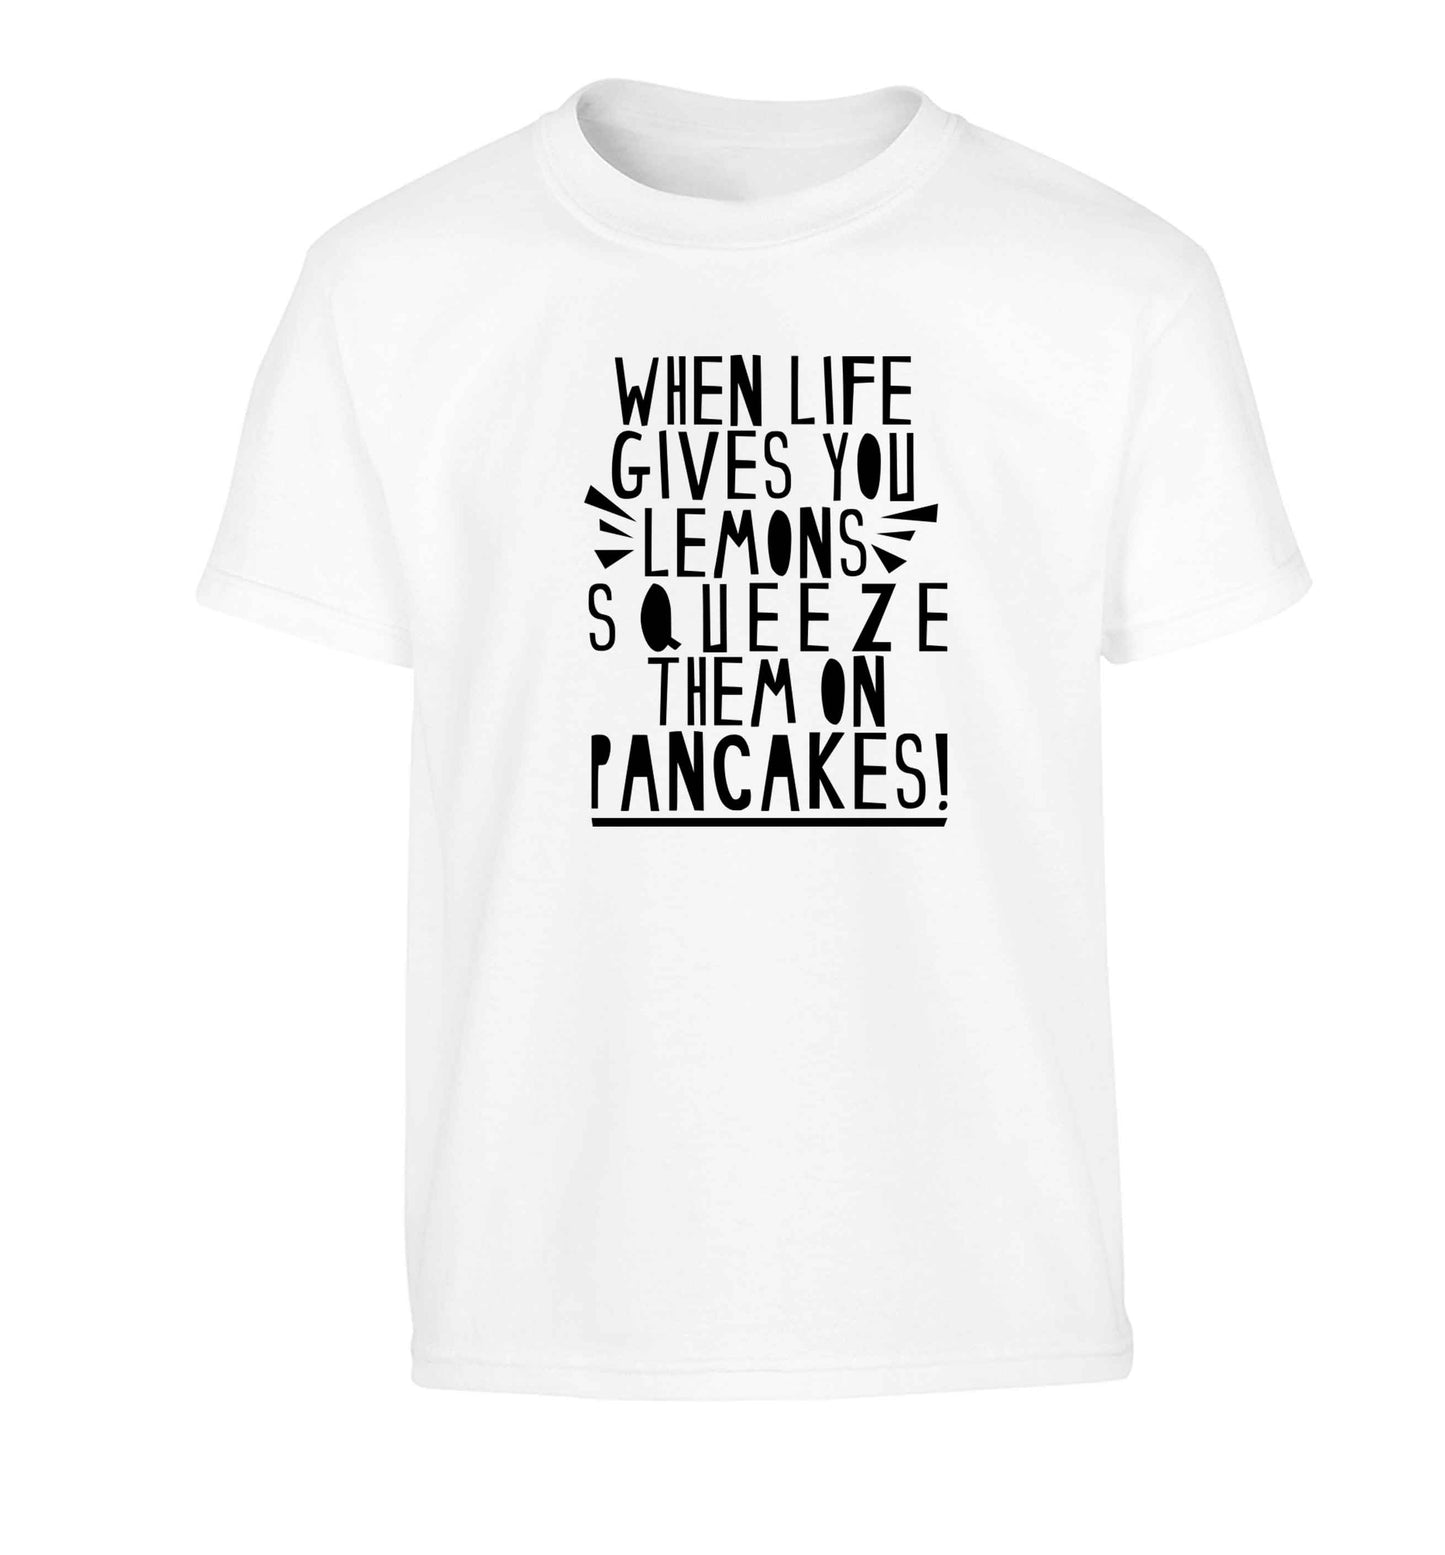 When life gives you lemons squeeze them on pancakes! Children's white Tshirt 12-13 Years